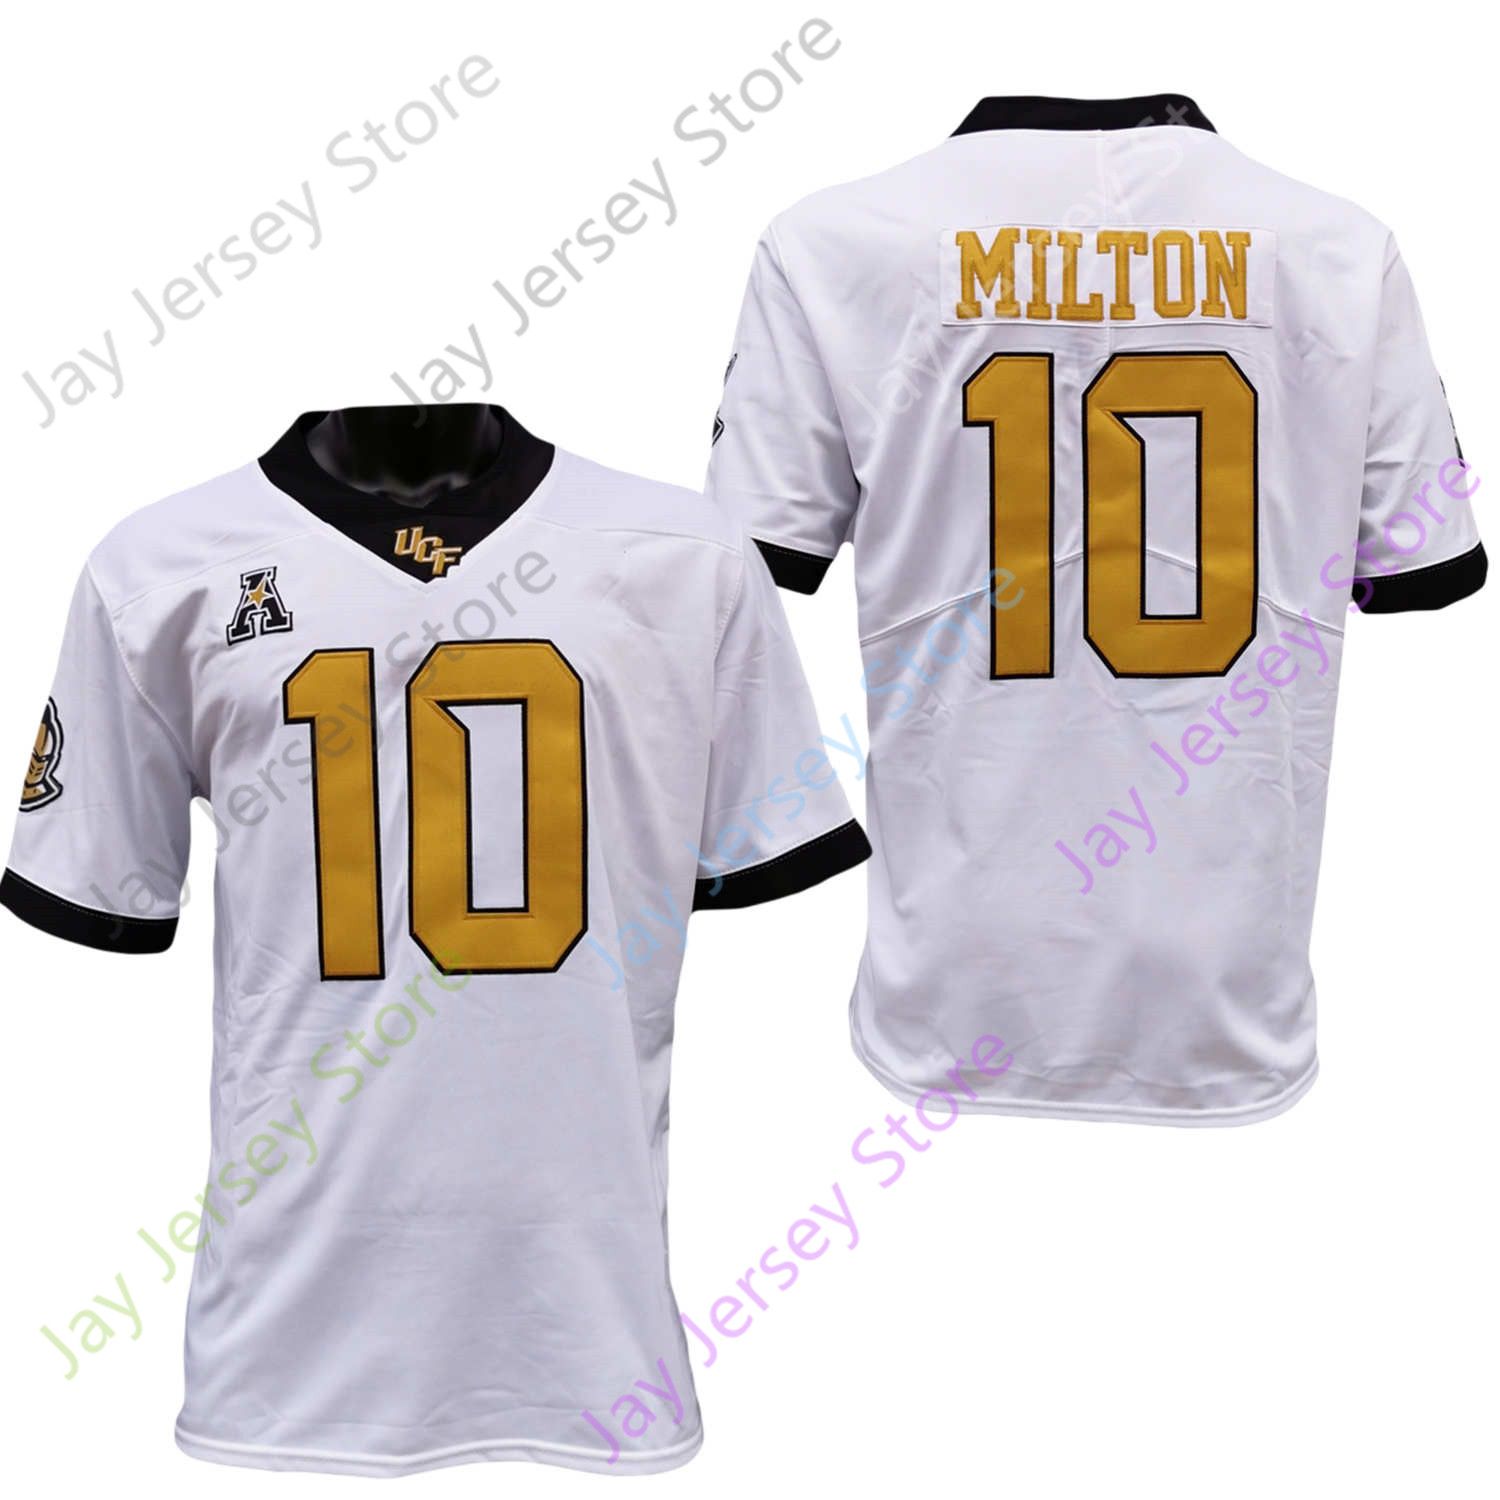 ucf youth jersey